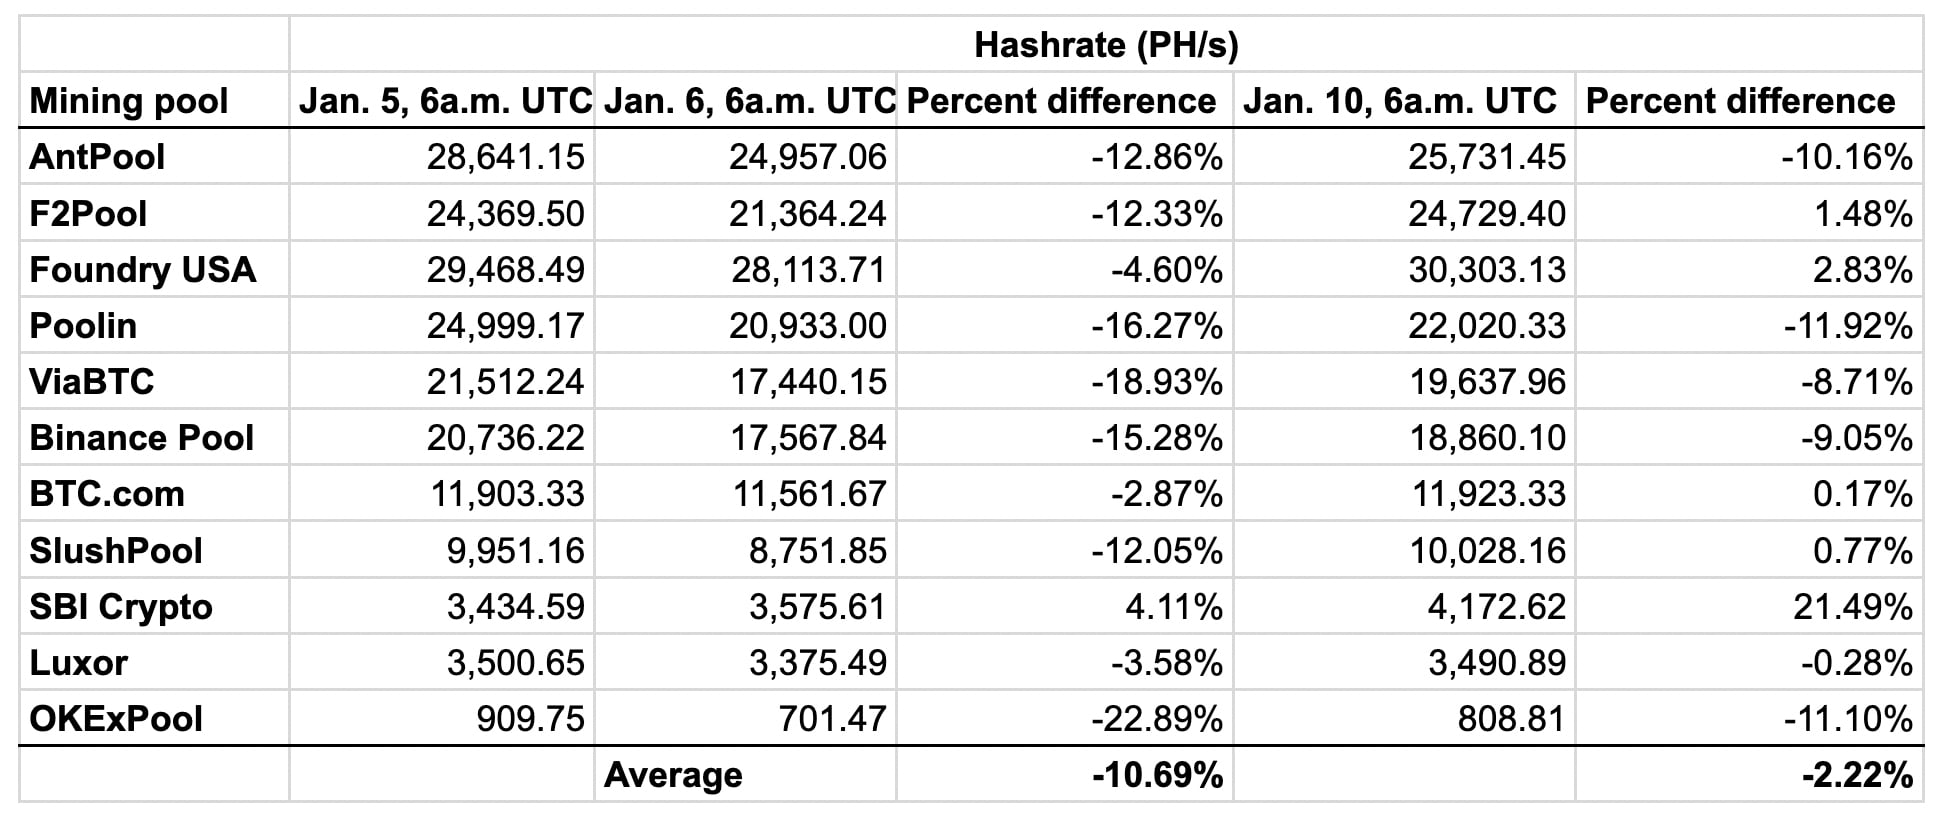 Hashrate losses of major bitcoin mining pools narrowed, as internet connectivity in Kazakhstan was partially restored on Jan. 10. (Data from BTC.com)